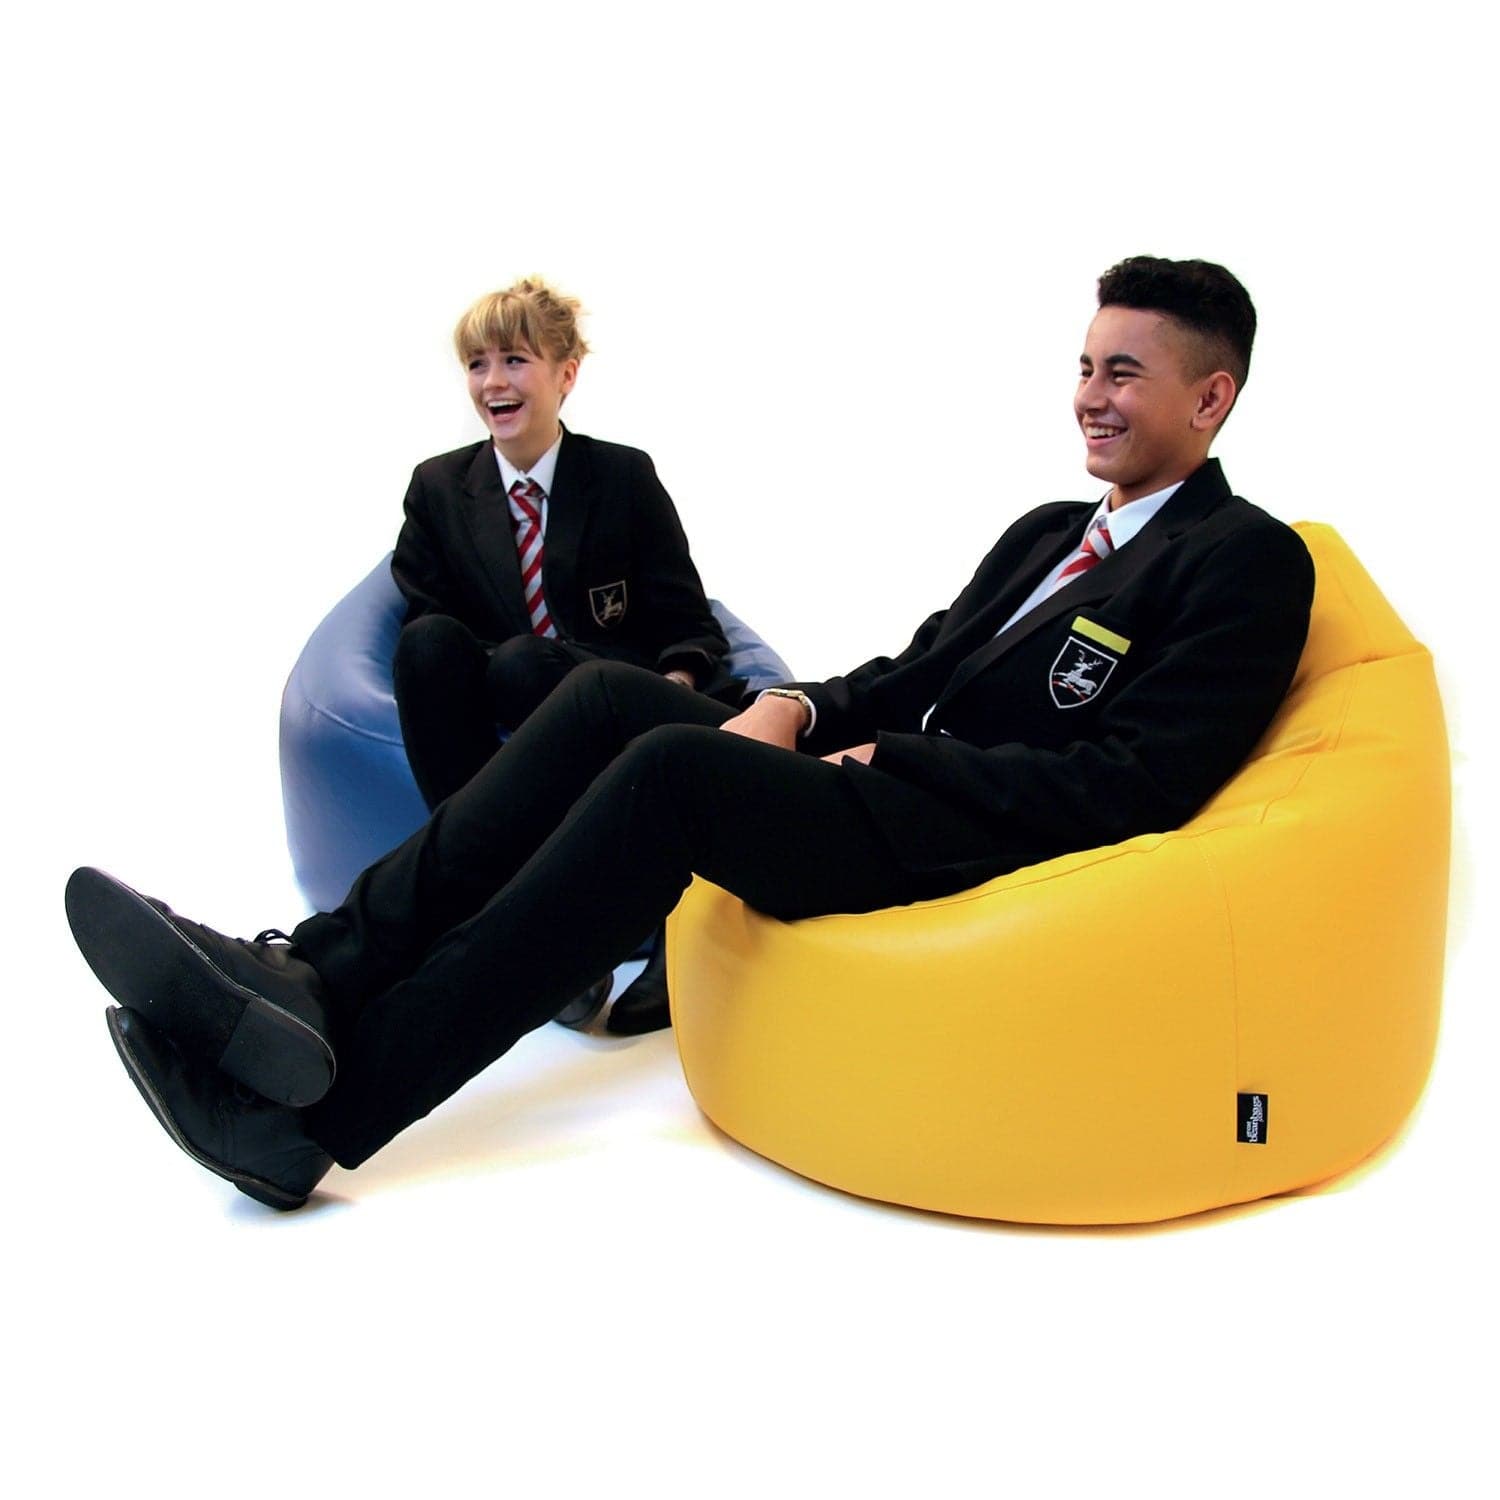 Teenage Bean Bag Chair, The Teenage bean bag supportive, structured bean bag, this is the perfect design for teenagers using laptops or reading for long periods of time.The Teenage Bean Bag is designed with relaxing study in mind. The Teenage Bag Cool, comfortable and light.The Teenage Bean Bag is easy to move around to form group or solo study areas. The Teenage Bean Bag Indoor/Outdoor bean bags are made from a soft, shower-proof and UV Resistant material - meaning the sun and rain won't damage them! Altho